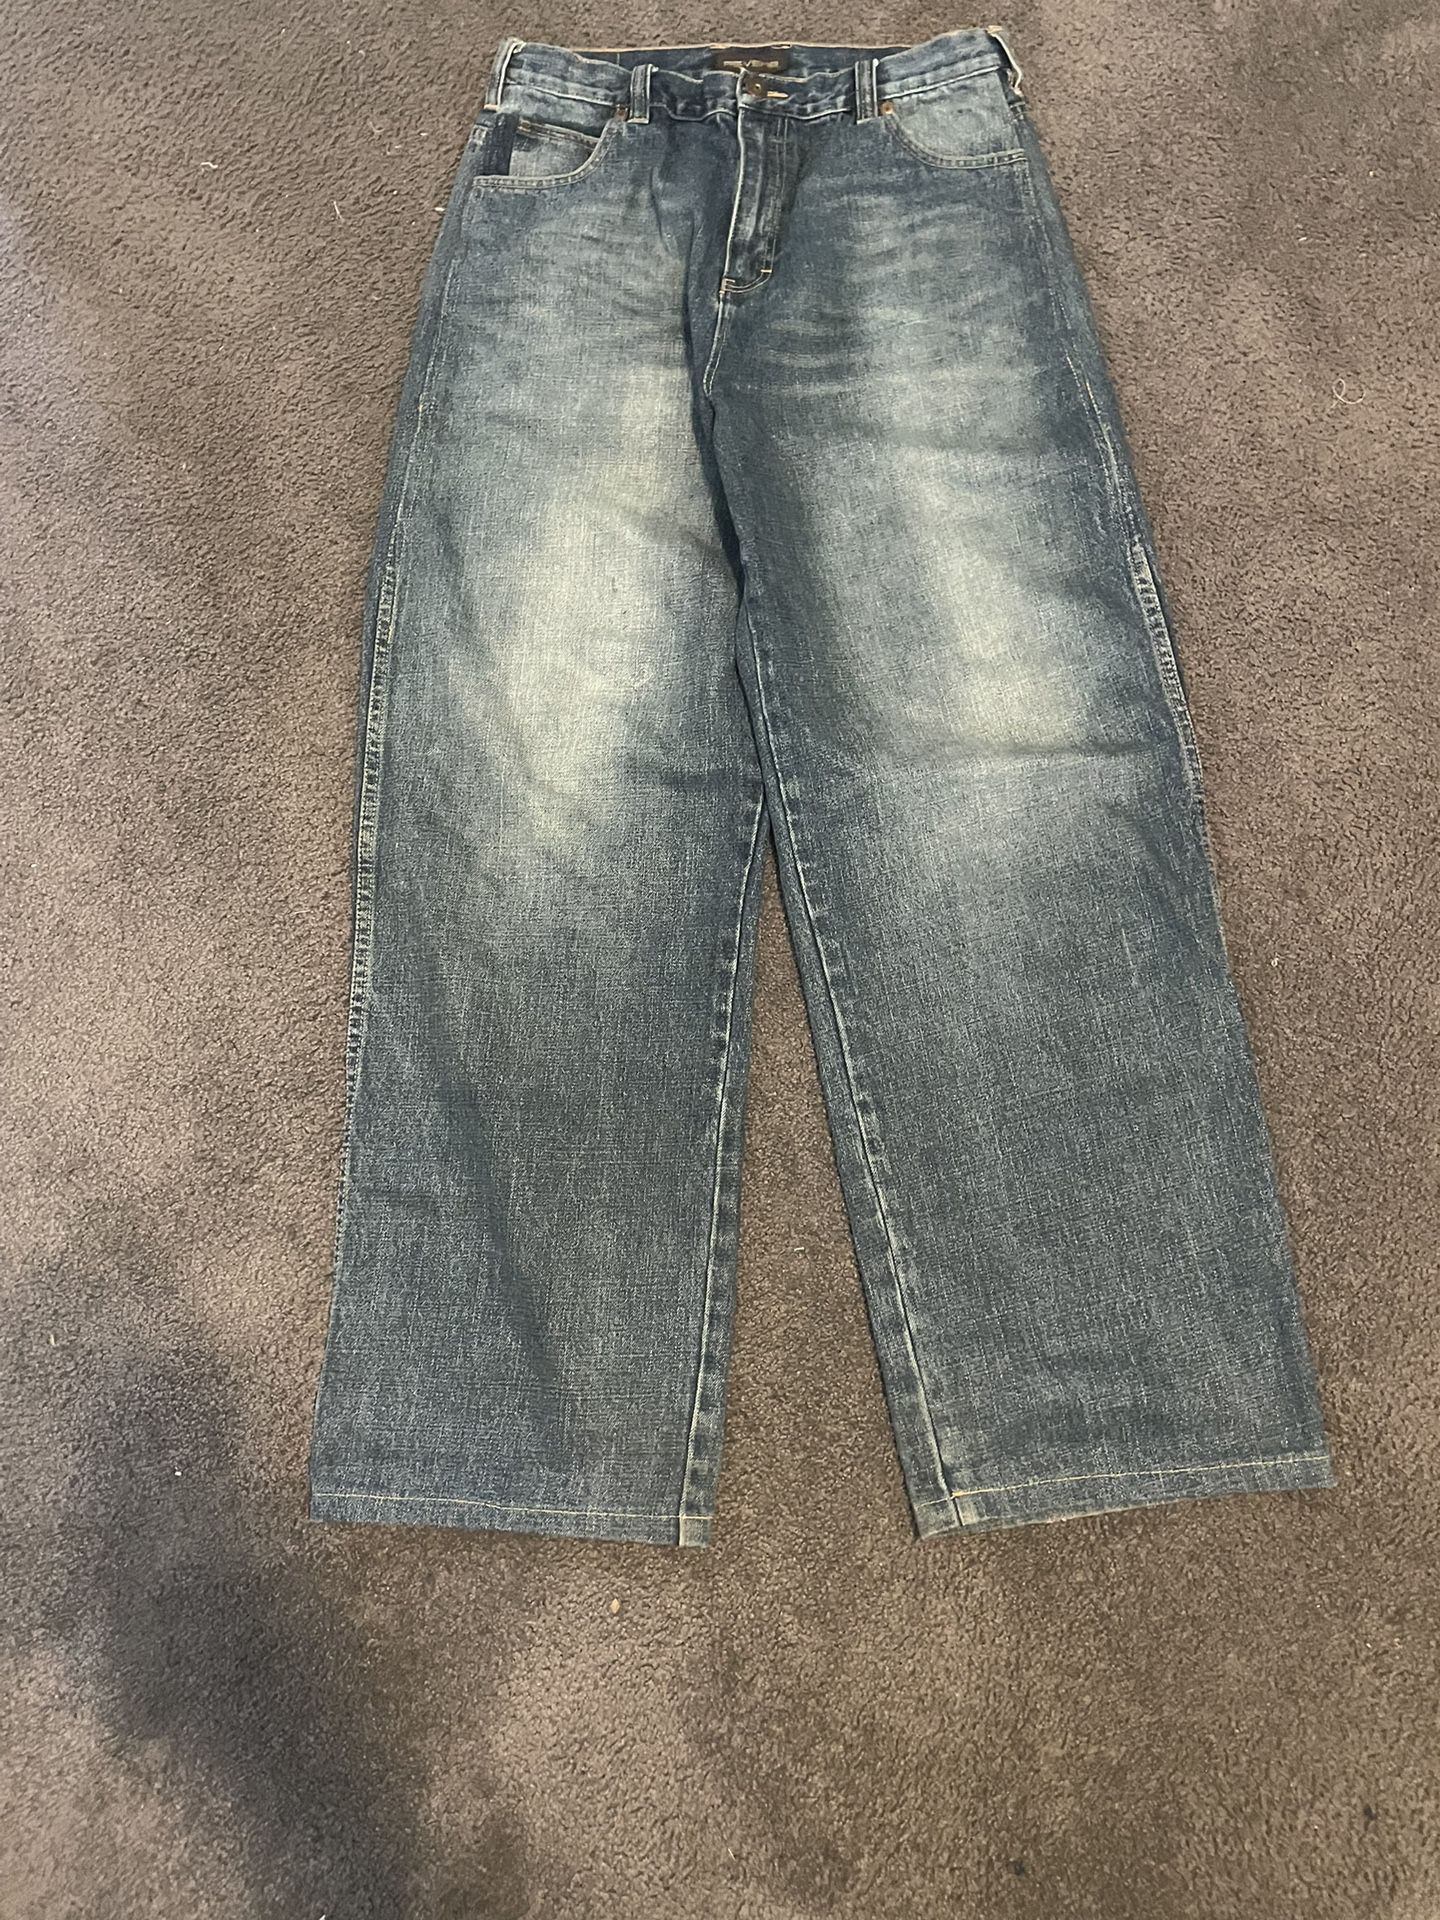 Reverb Jeans for Sale in Hesperia, CA - OfferUp